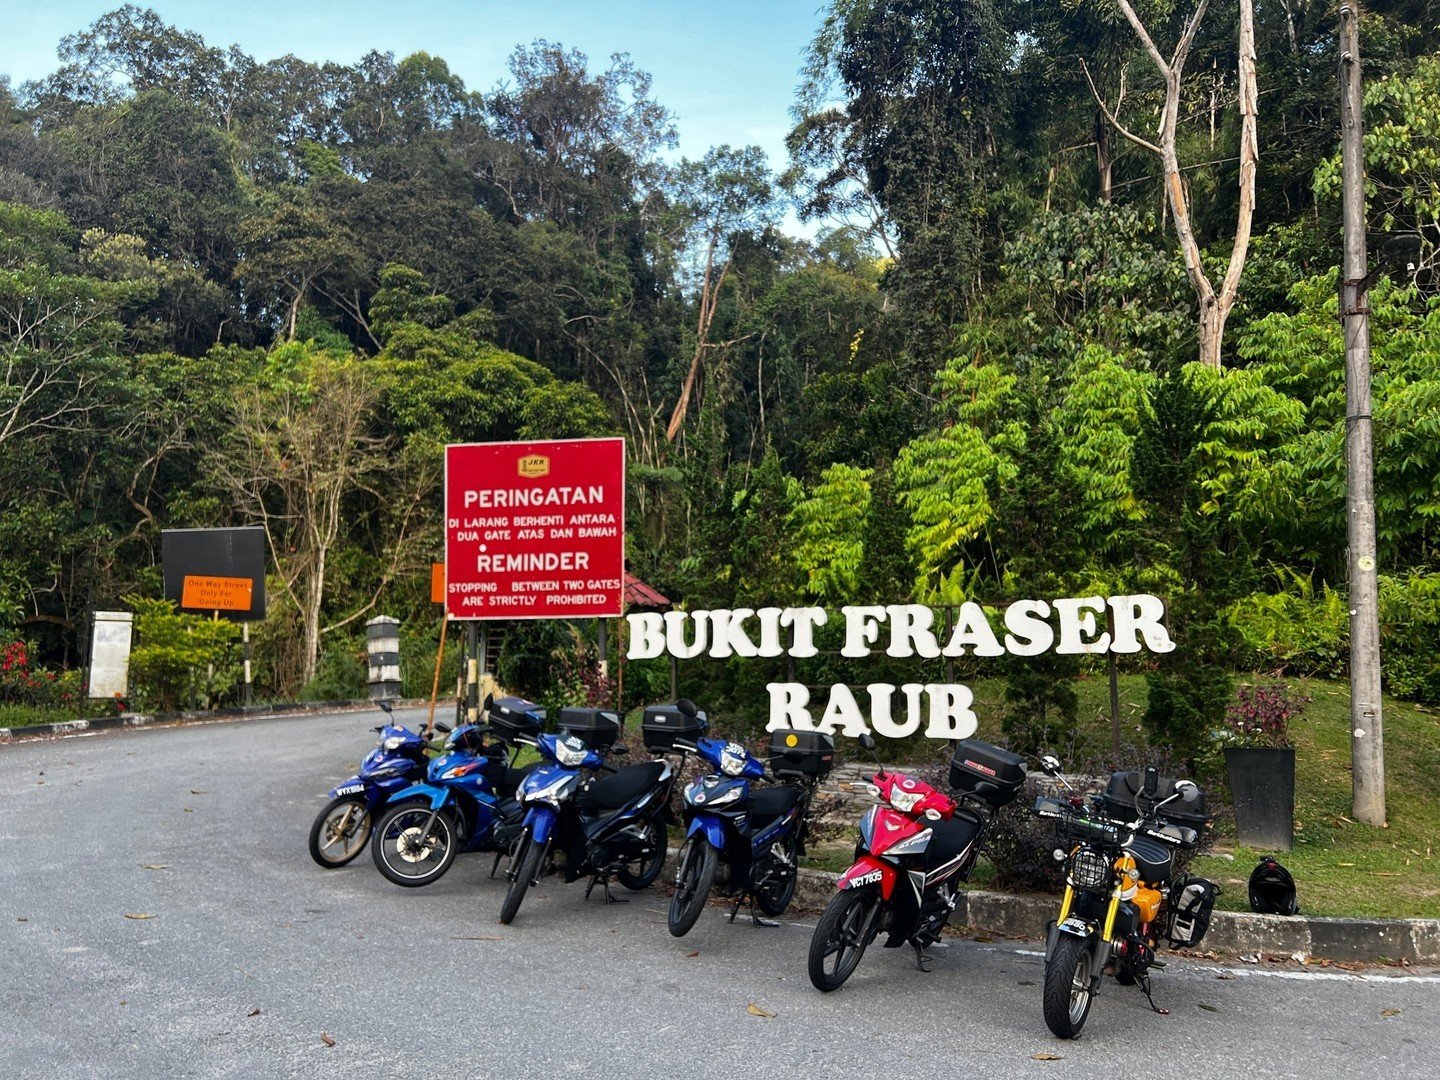 A great stop, close to Kuala Lumpur - some of the best corners I've ever ridden!⁠
⁠
- Small Bike Stuff